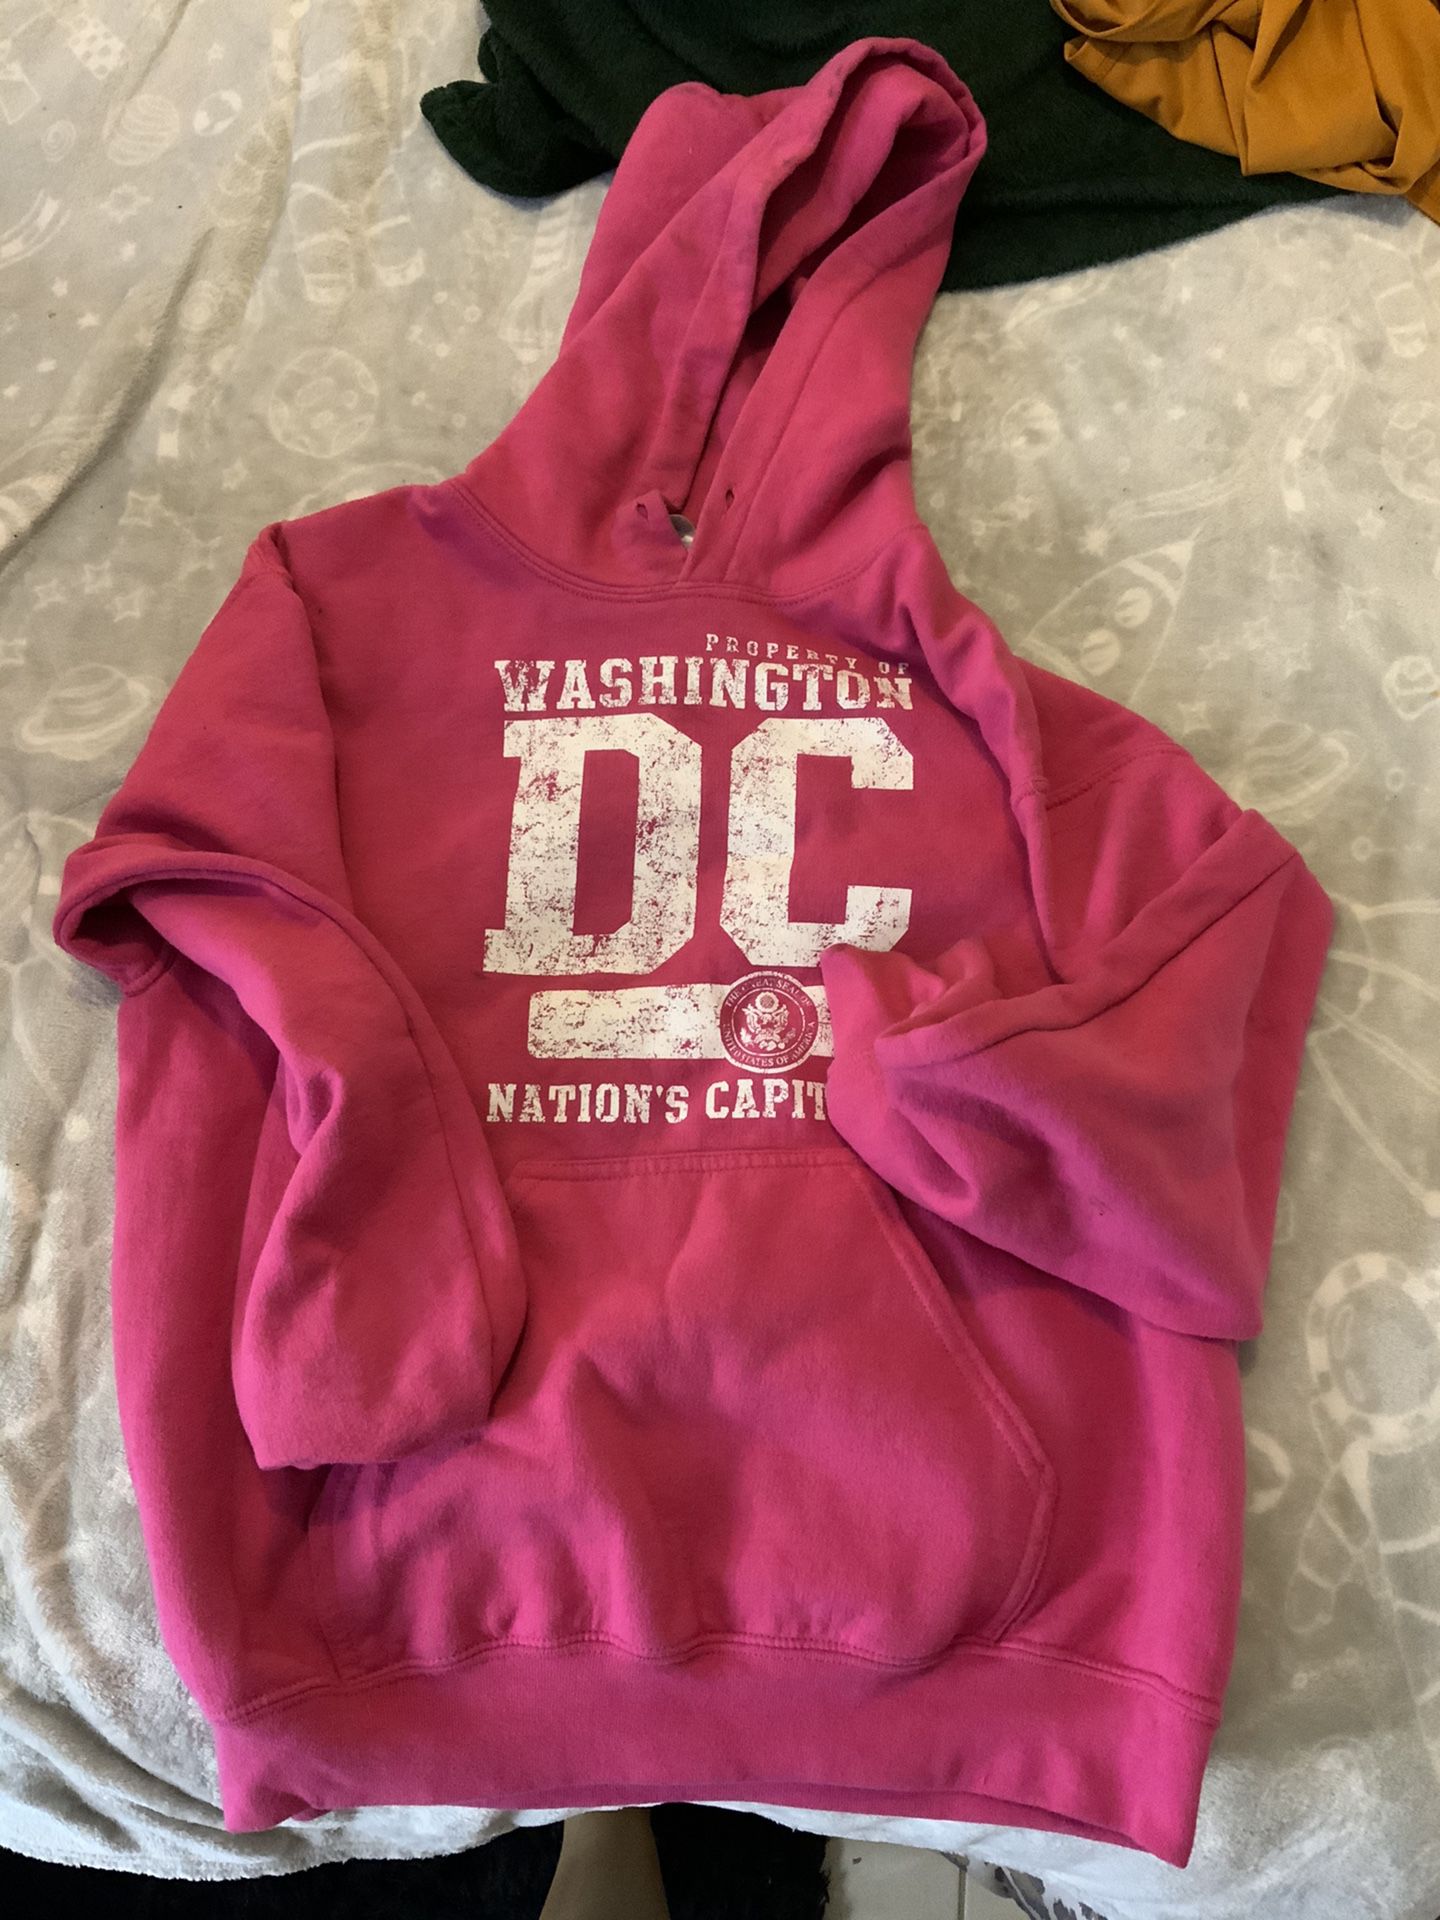 Pink Hoodie, Size Small. $10 Or Best Offer.